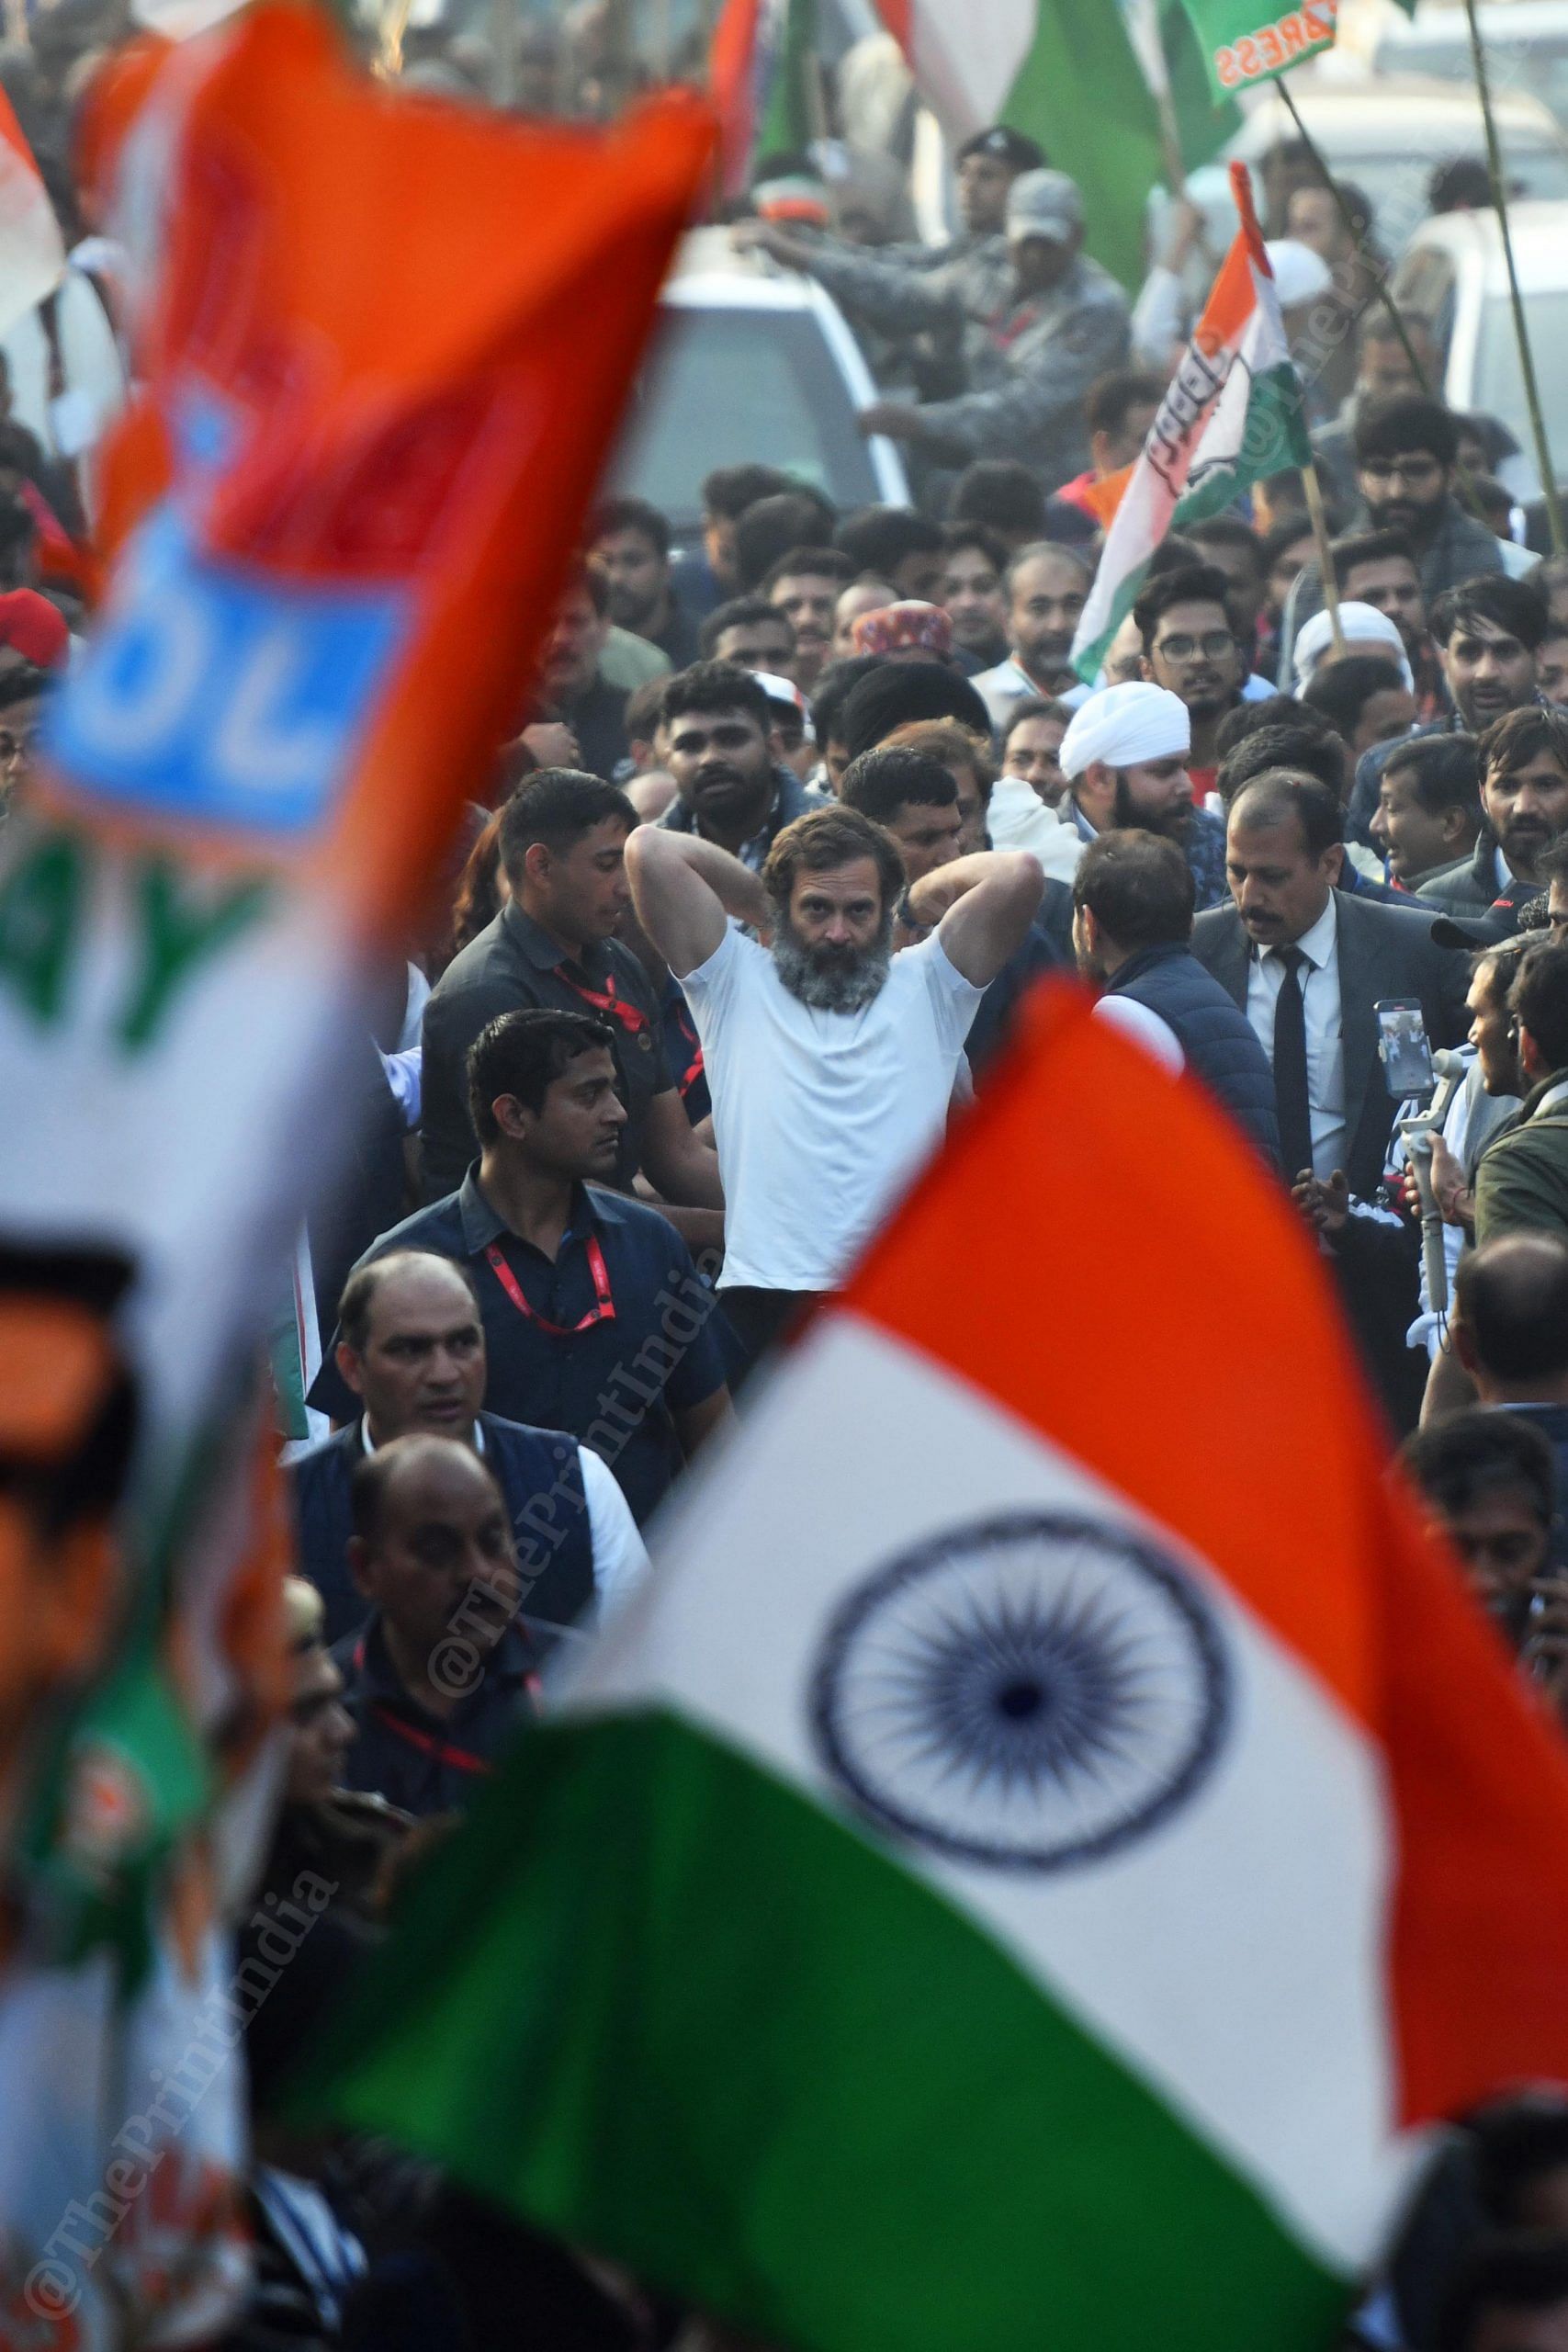 Rahul surrounded by crowd of supporters.  Photo: Suraj Singh Bisht |  impression